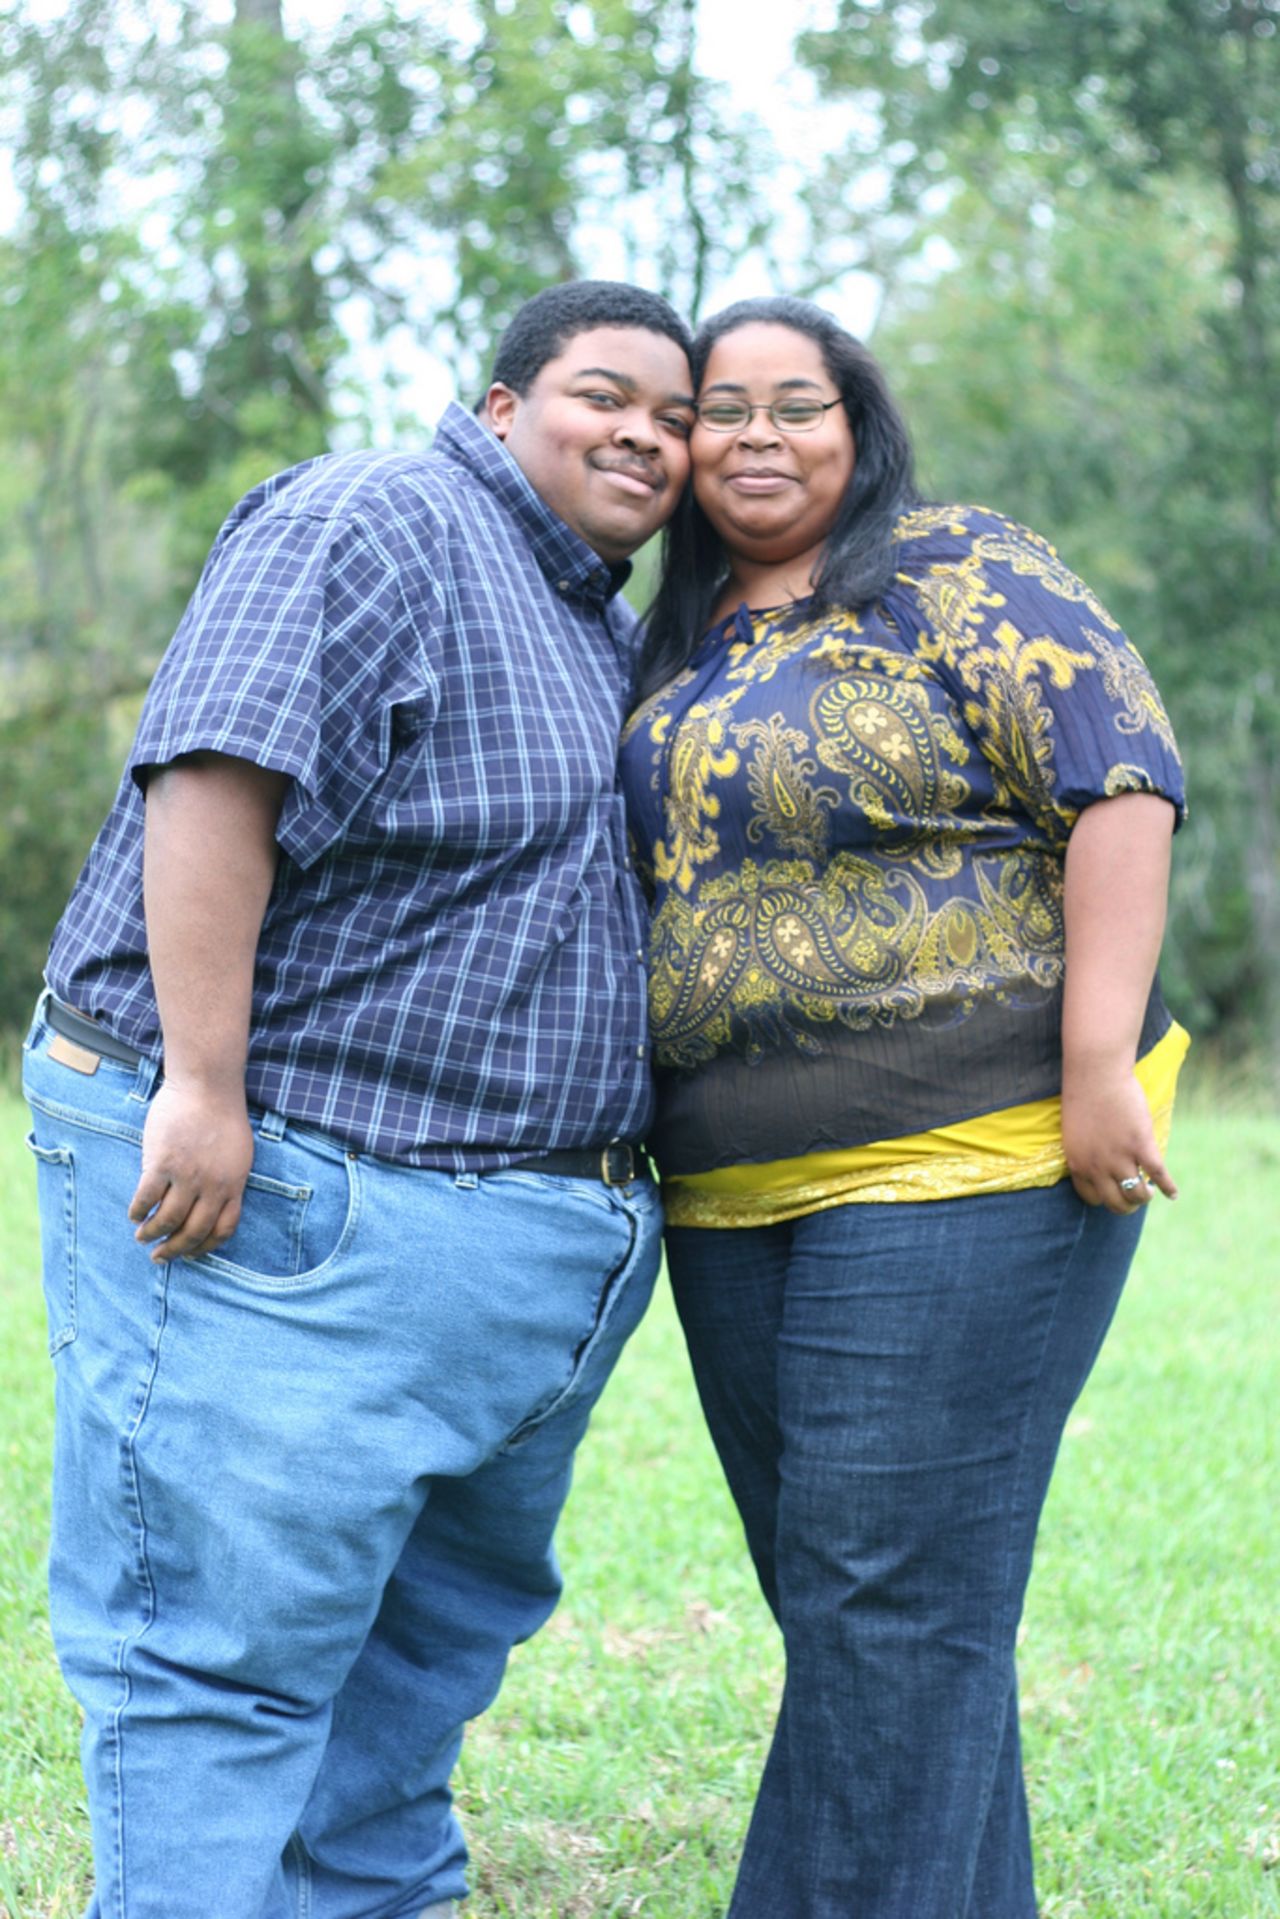 At their heaviest, Willie and Angela Gillis weighed 492 and 338 pounds, respectively. 